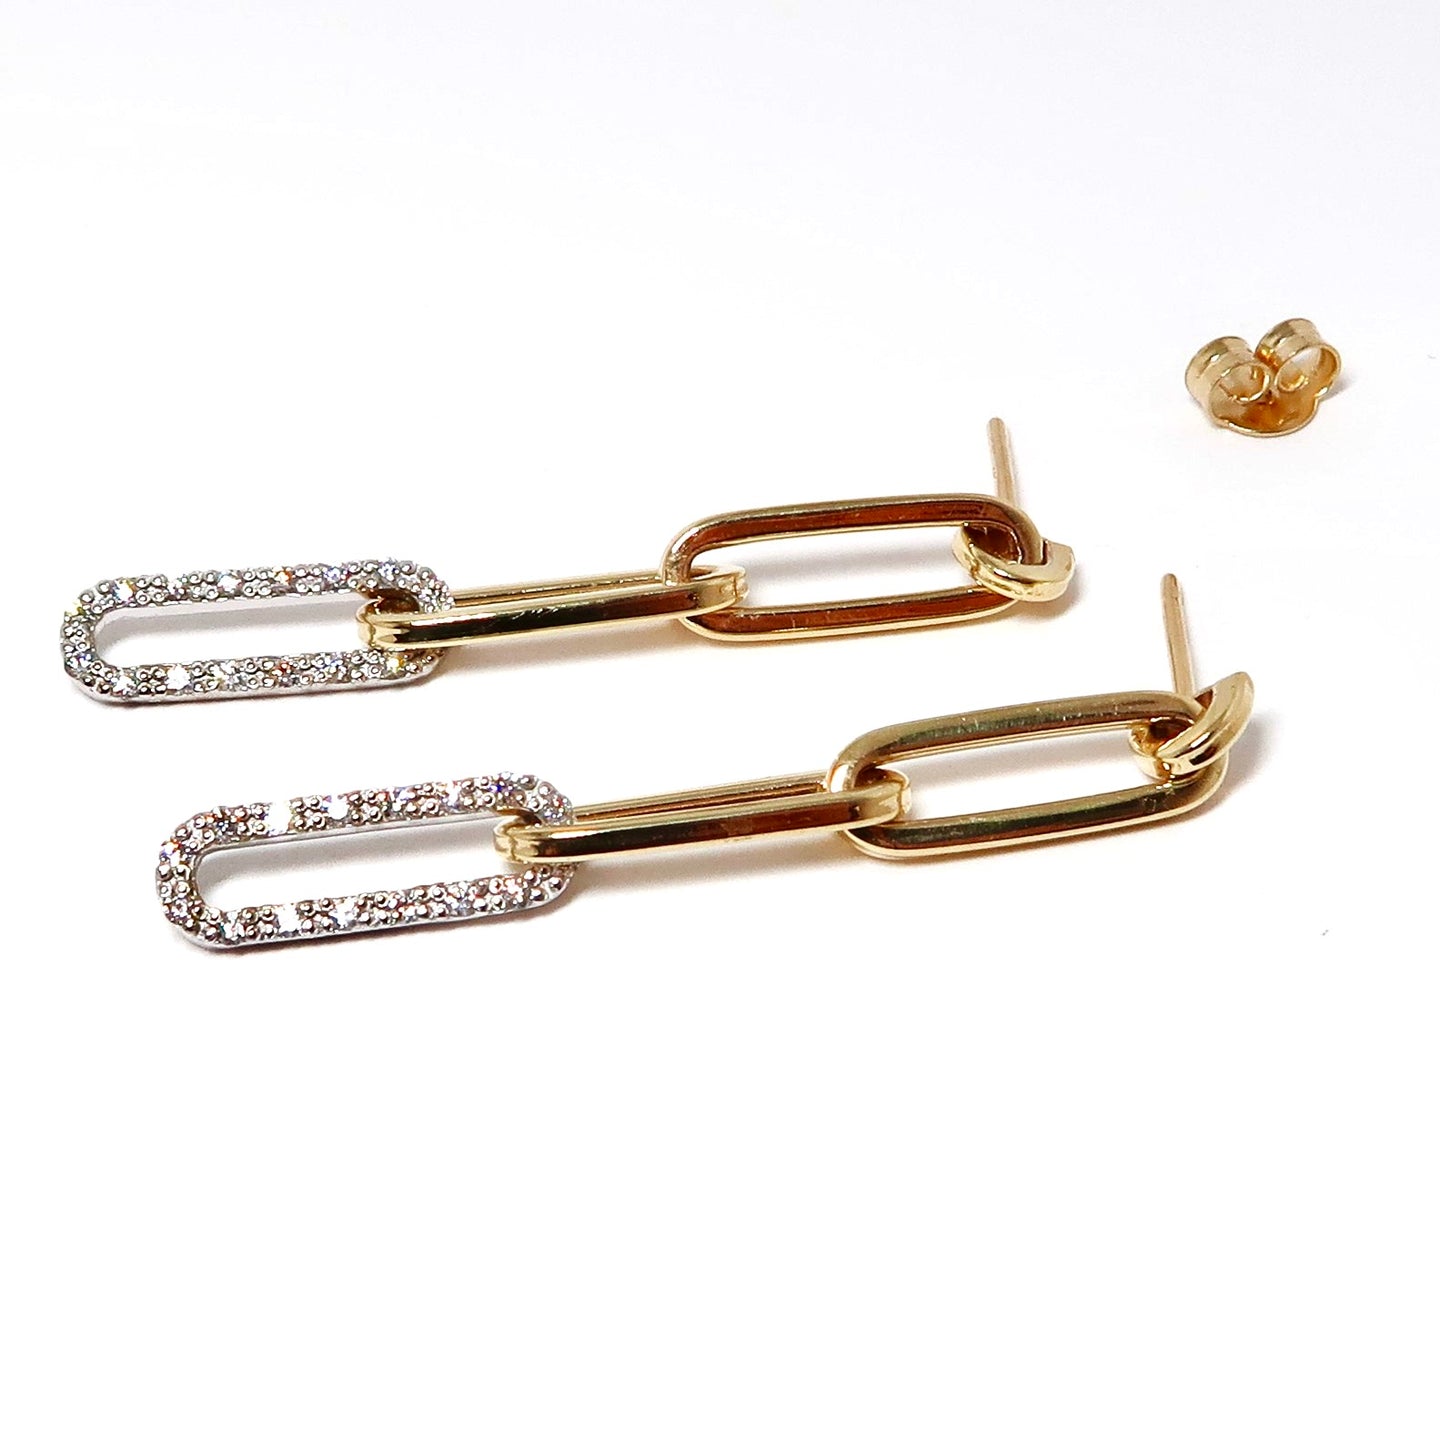 14k White & Yellow Gold Paperclip Earrings with Diamonds